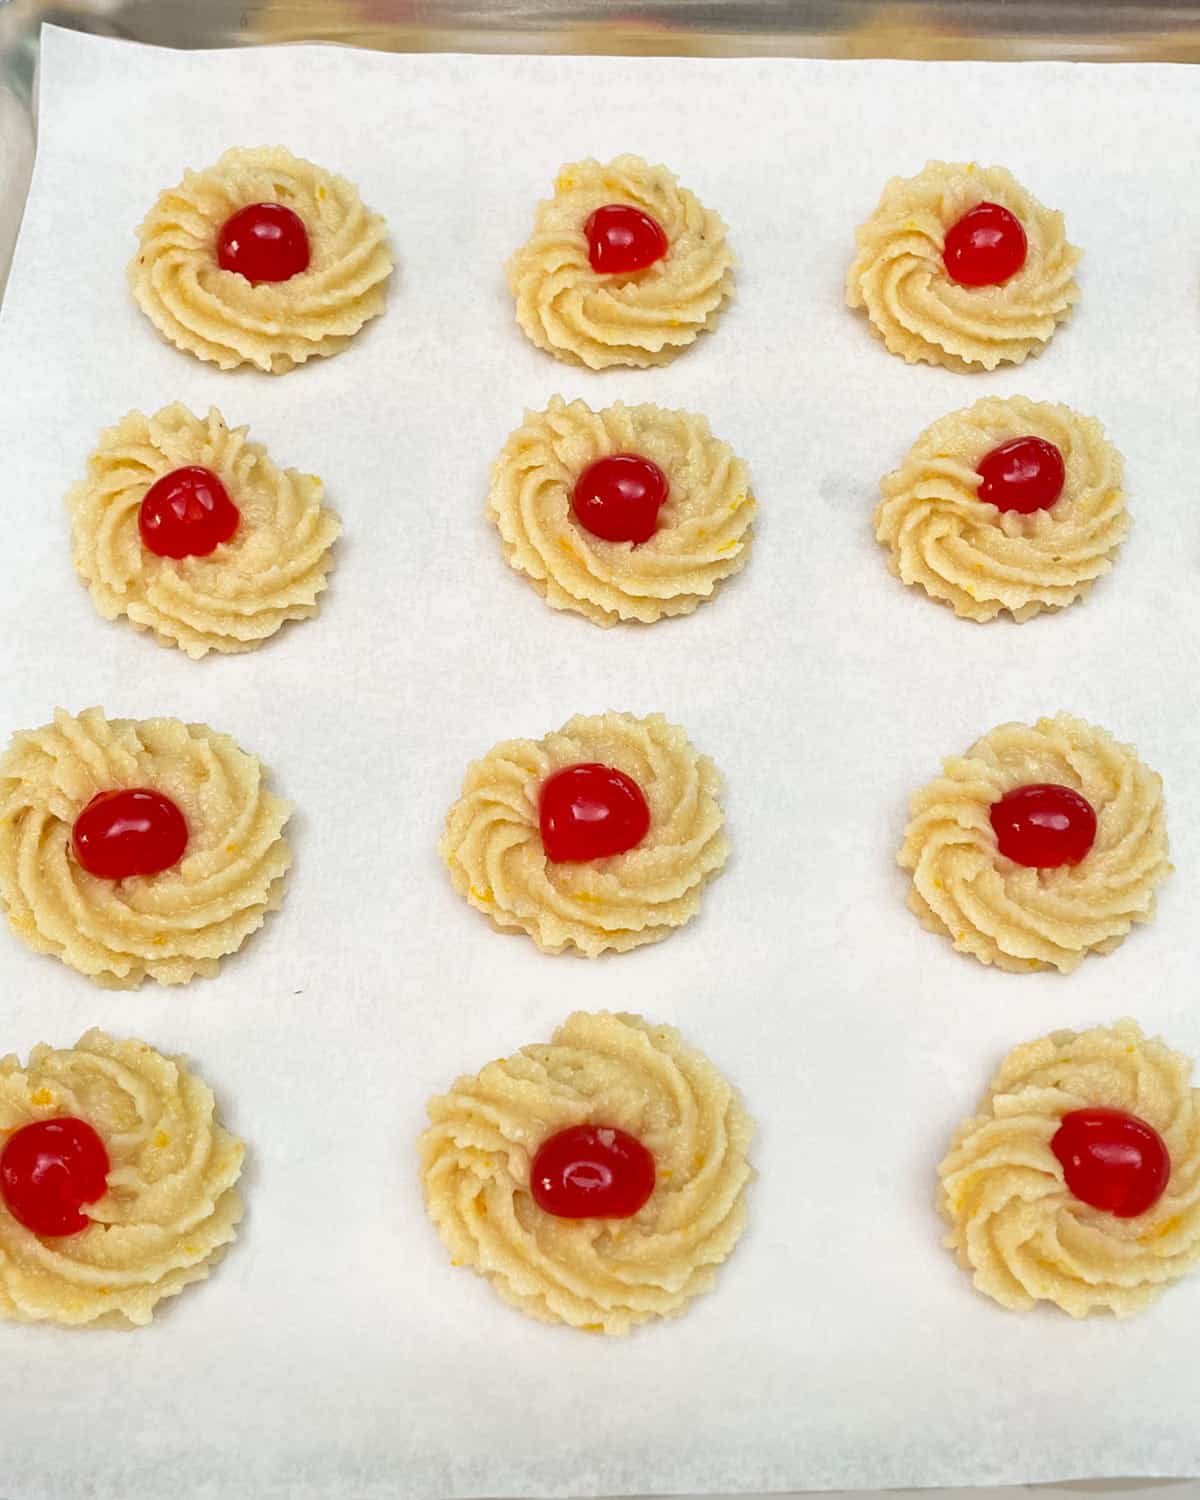 Piped two inch circles with half a cherry on top, on parchment paper.